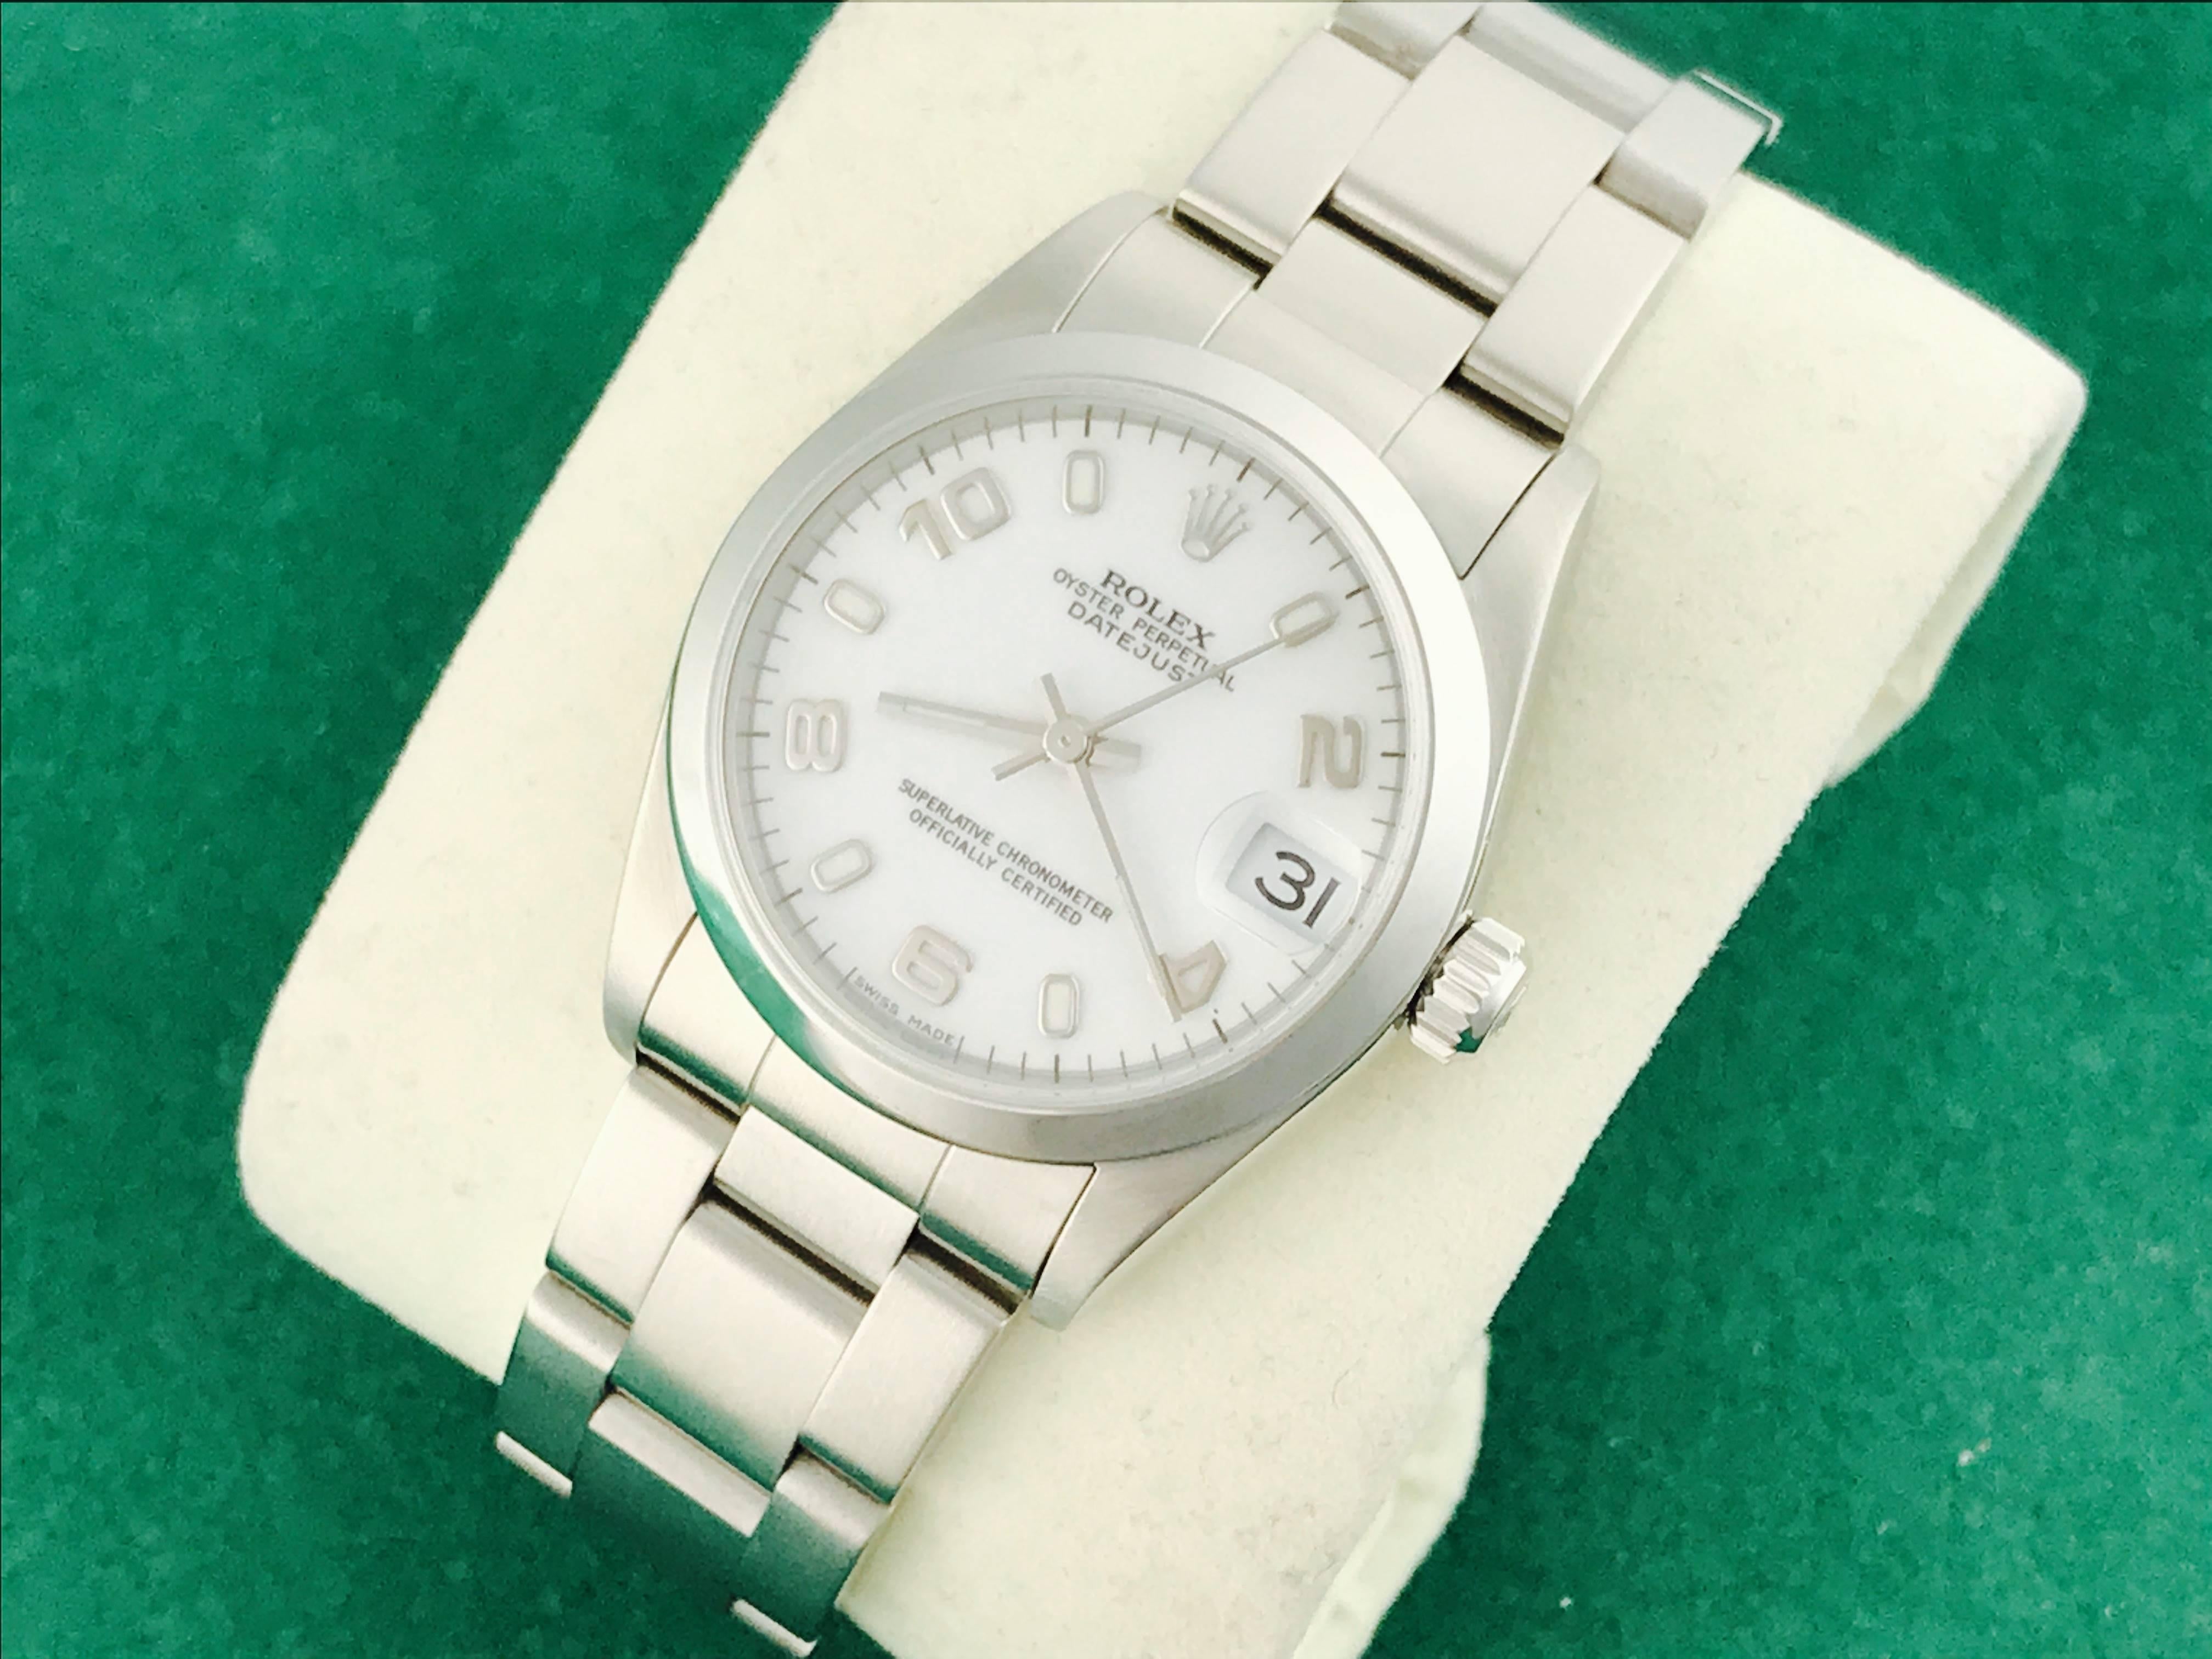 Contemporary Rolex Stainless Steel White Dial Datejust Oyster Automatic Wristwatch Ref 68240 